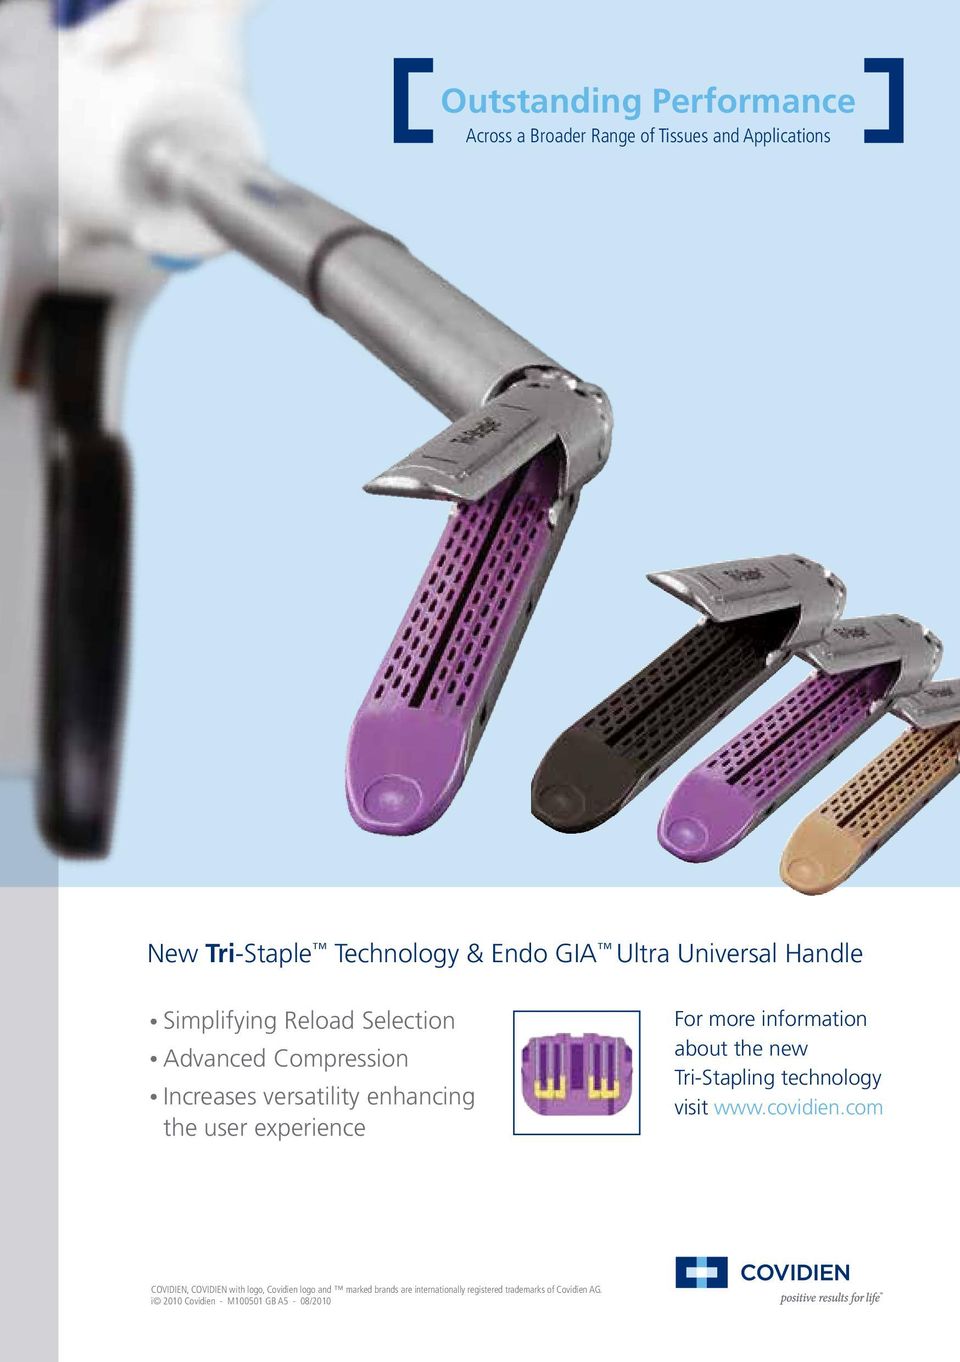 For more information about the new Tri-Stapling technology visit www.covidien.